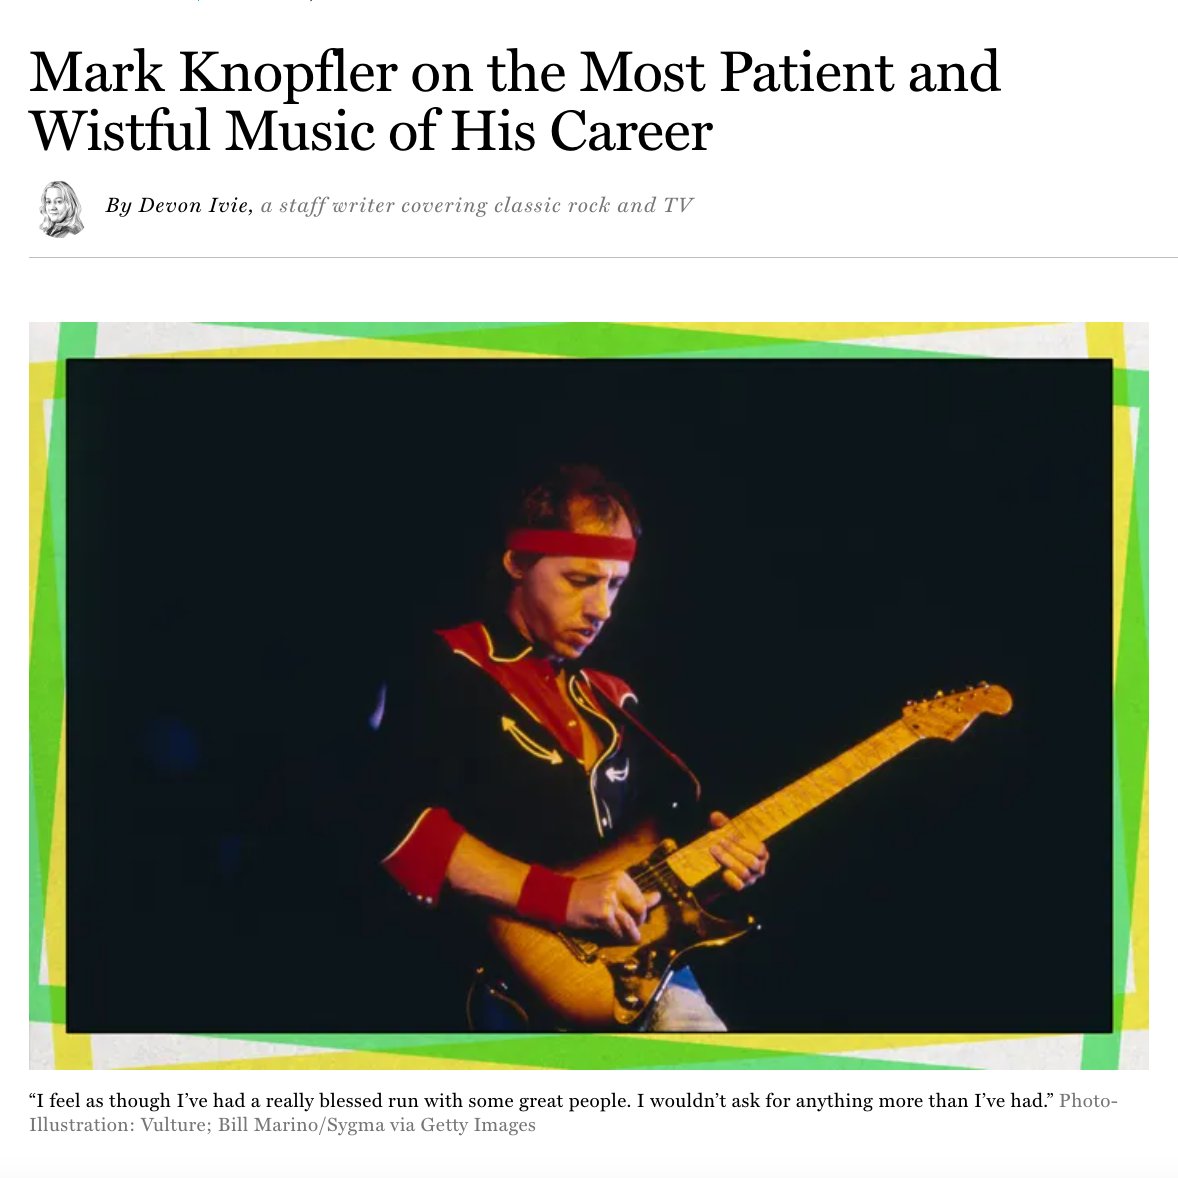 'Knopfler’s lineage now includes One Deep River, an elegant record that’s a culmination of everything we know and admire about his style.' - @vulture Read Mark's in depth 'Superlatives' interview with Vulture: bit.ly/MKVultureInter… Photo by Bill Marino/Sygma via Getty Images